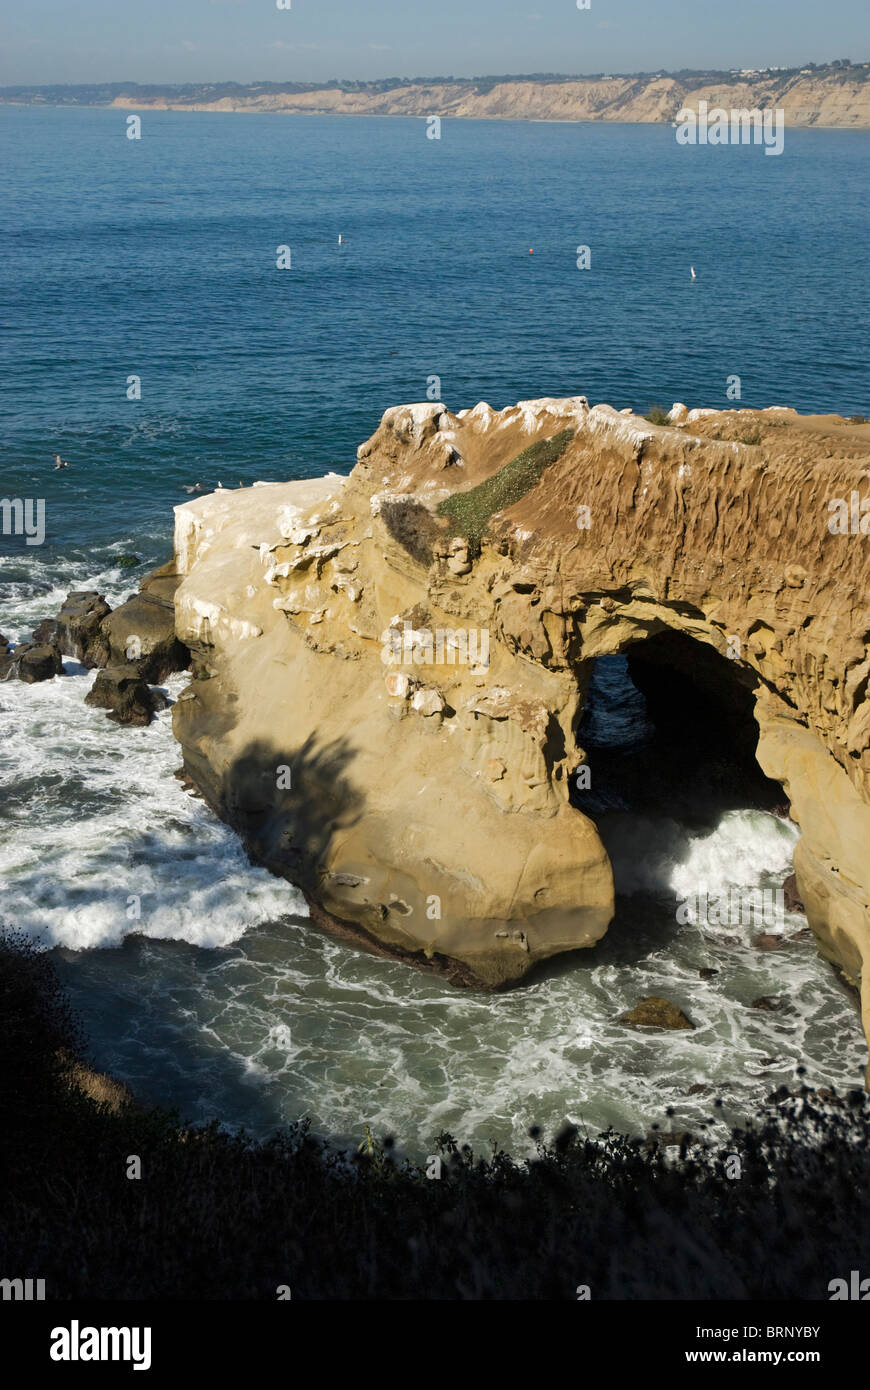 A sea cave, as seen looking over a cliff at La Jolla, California, USA Stock Photo